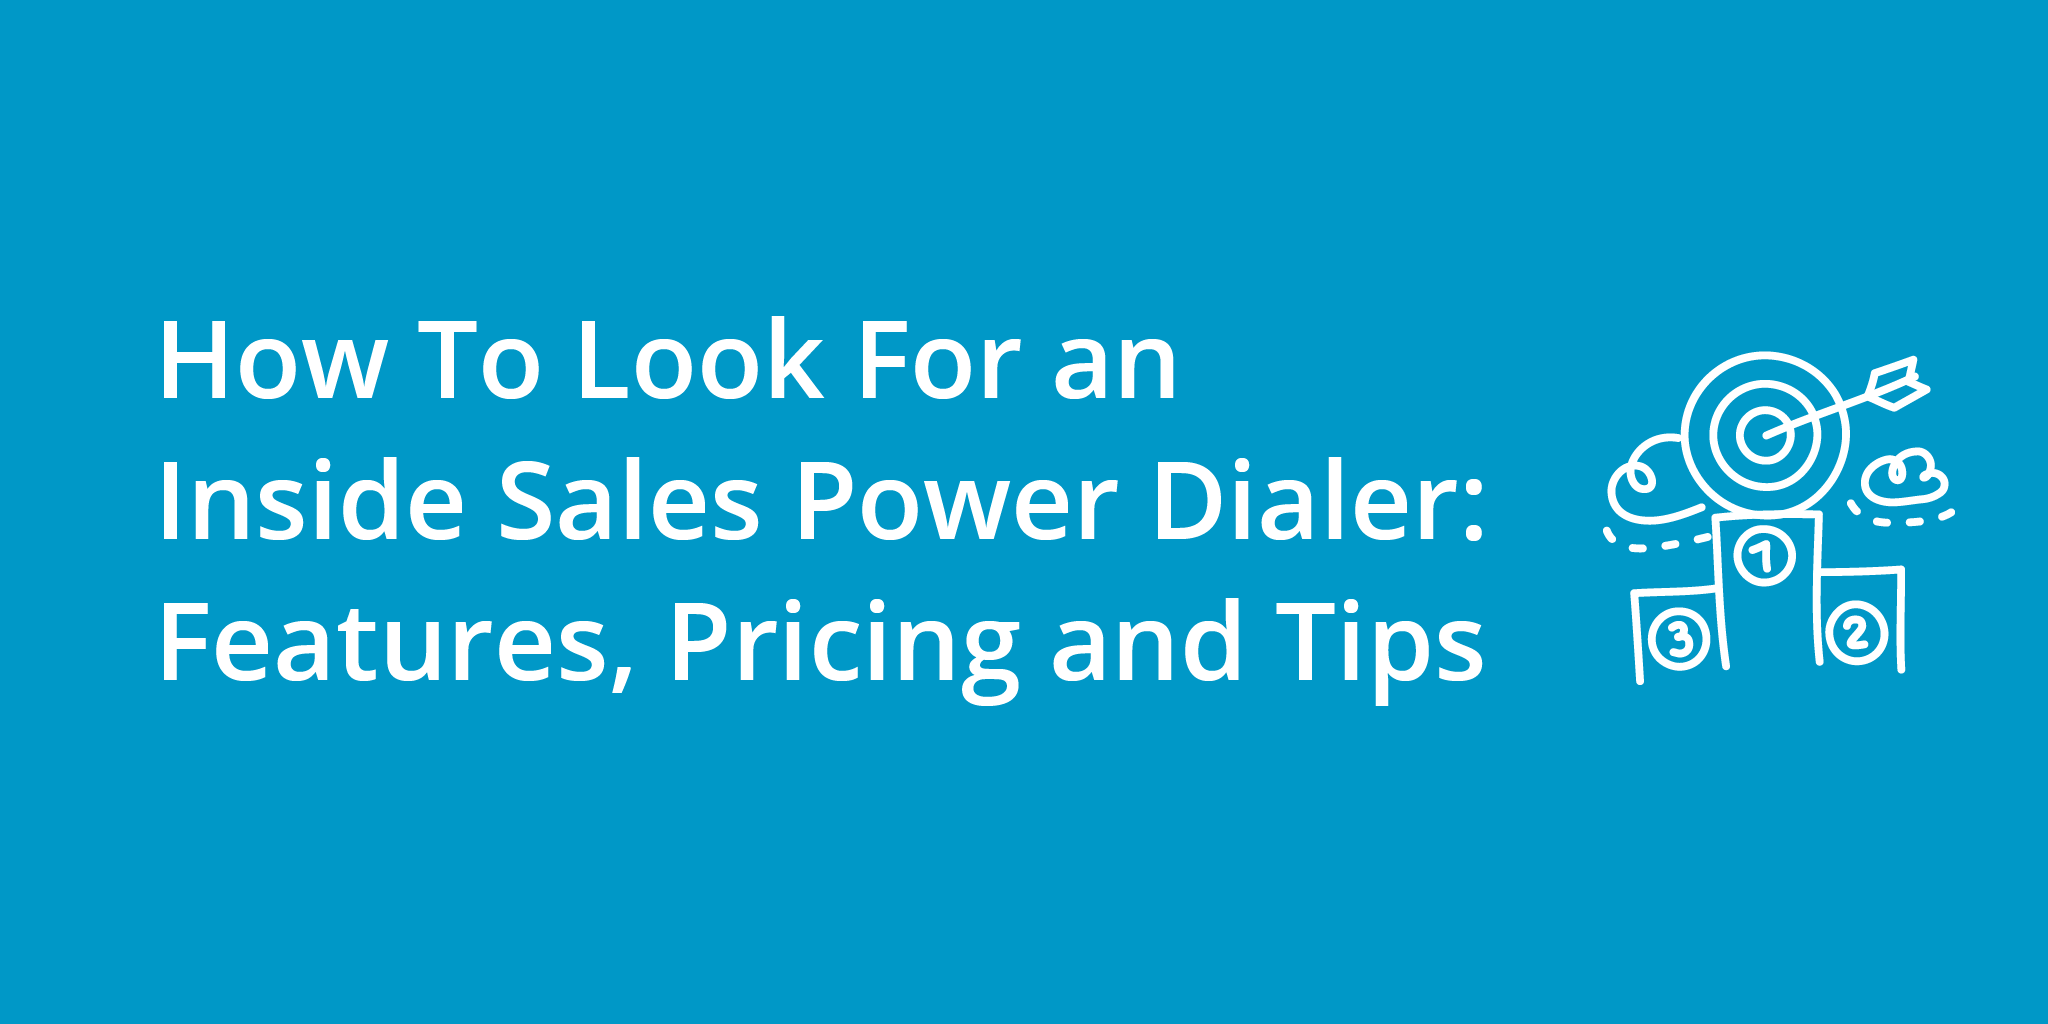 How To Look For an Inside Sales Power Dialer | Features, Pricing and Tips | Telephones for business